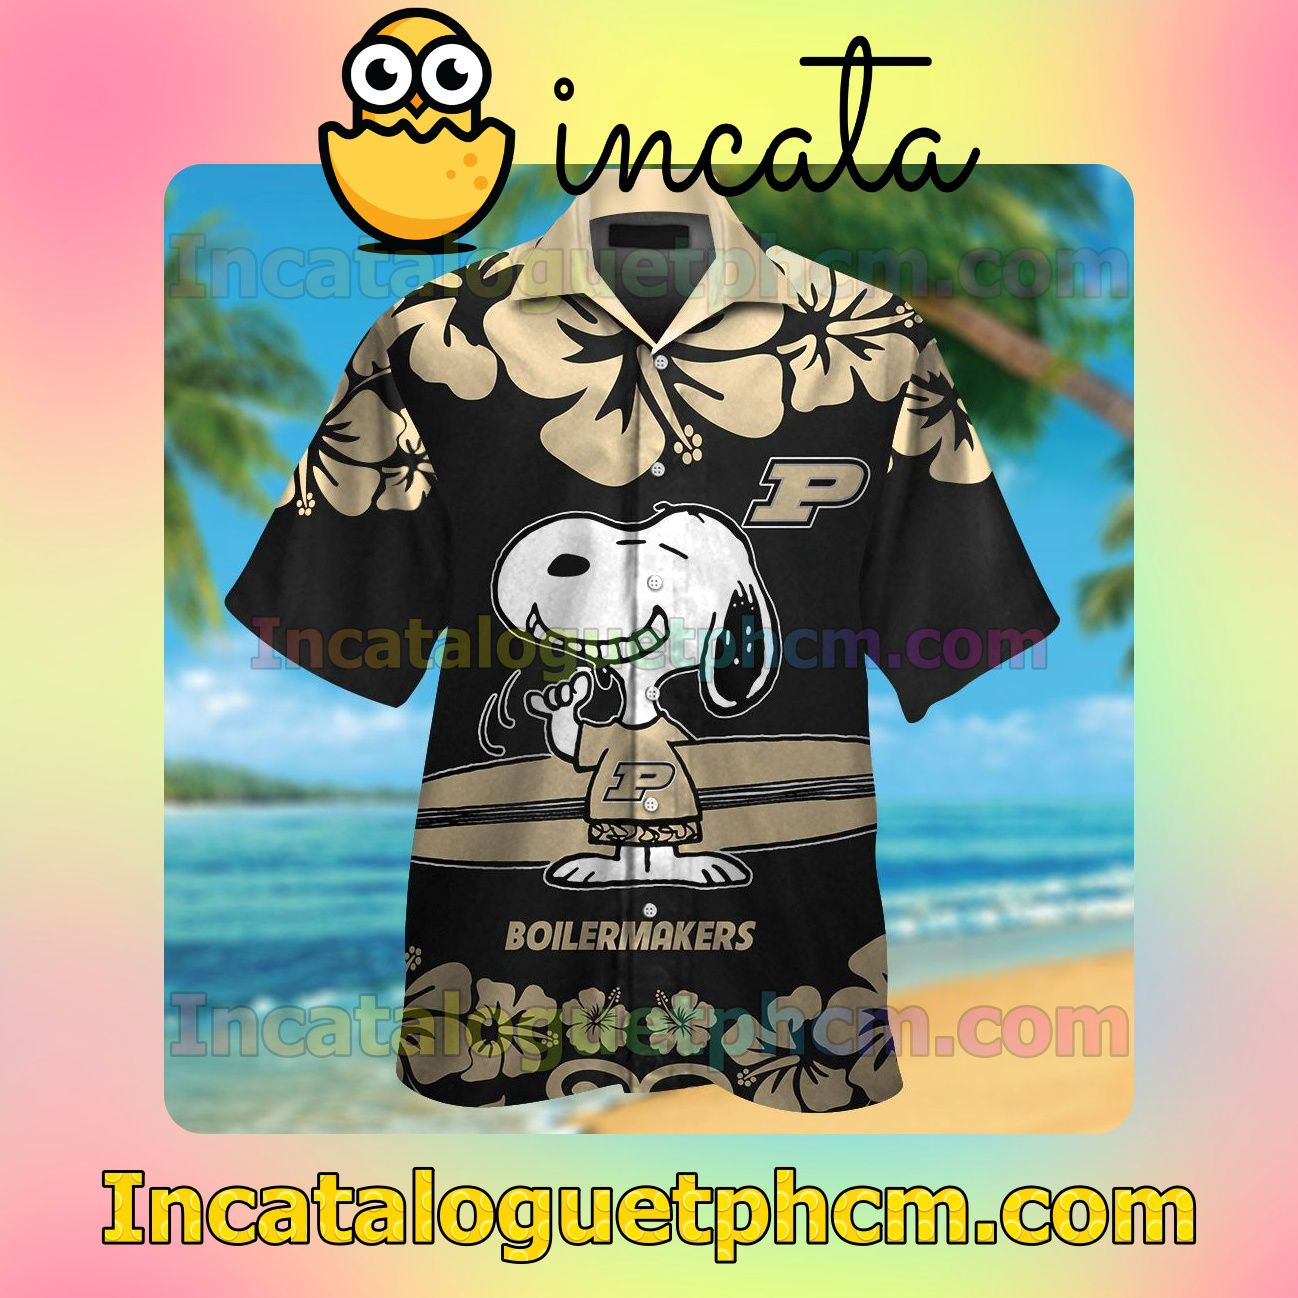 Purdue Boilermakers & Snoopy Beach Vacation Shirt, Swim Shorts